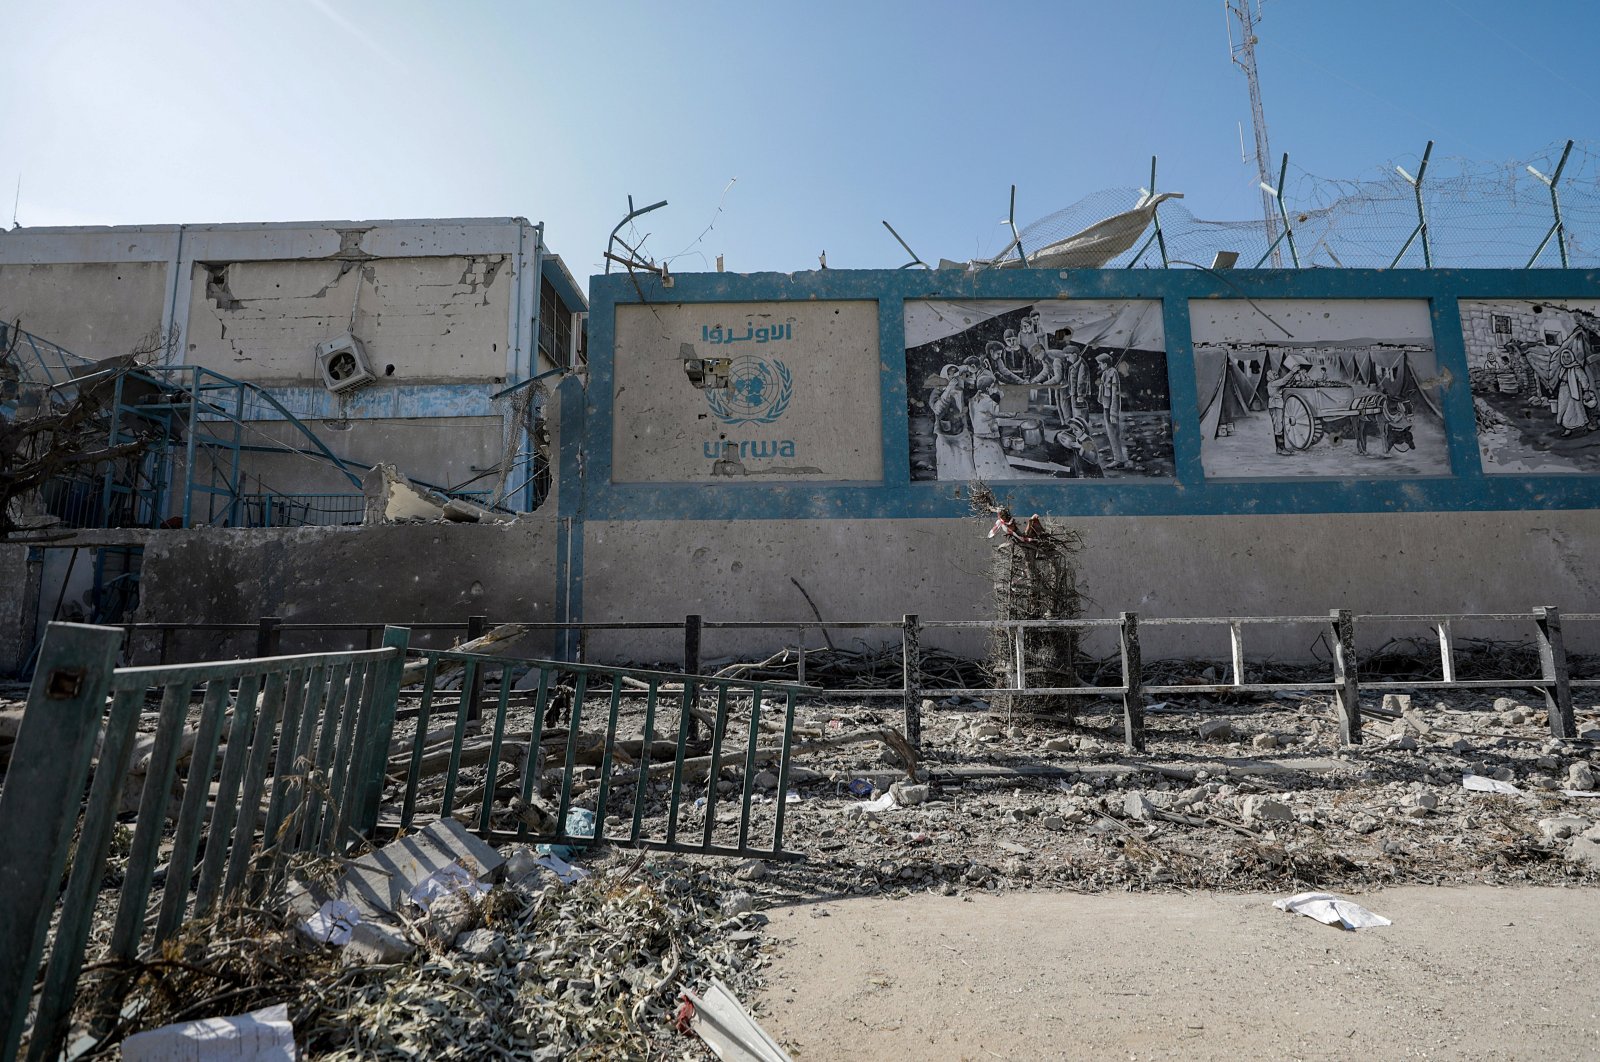 Israel’s attacks on Gaza cripple enclave’s economy, infrastructure